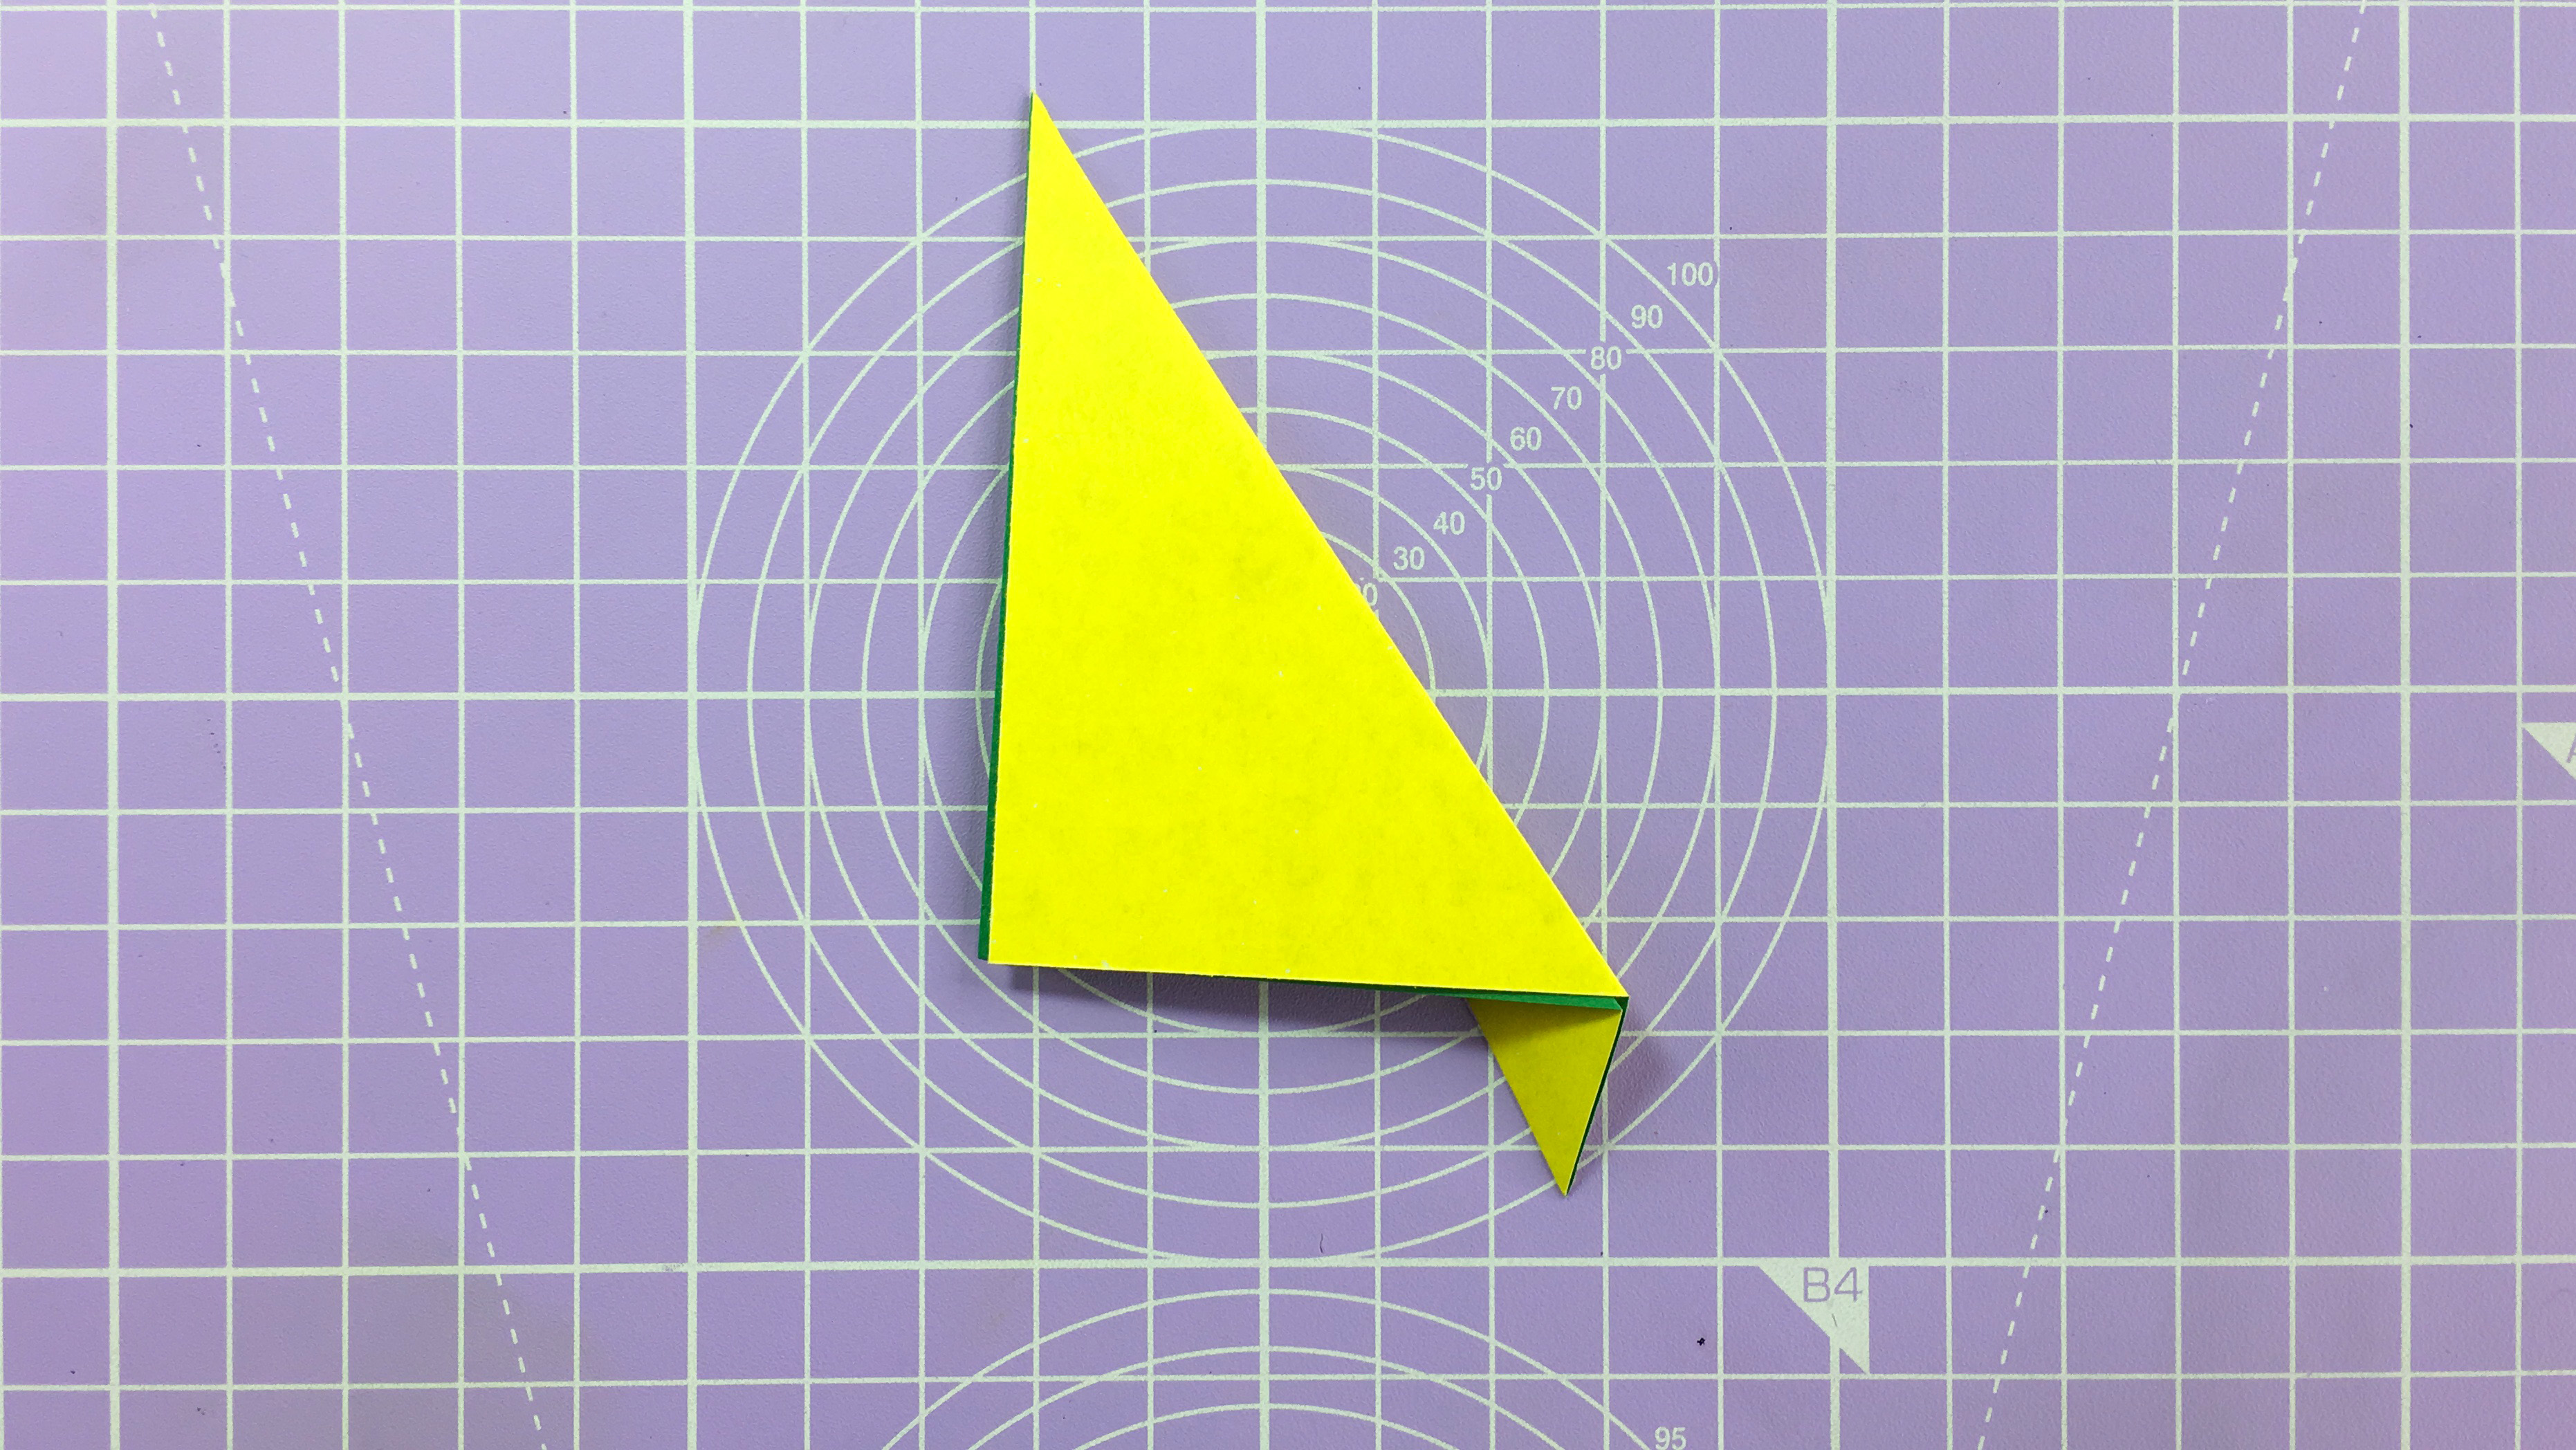 How to make an easy origami leaf - step 4a